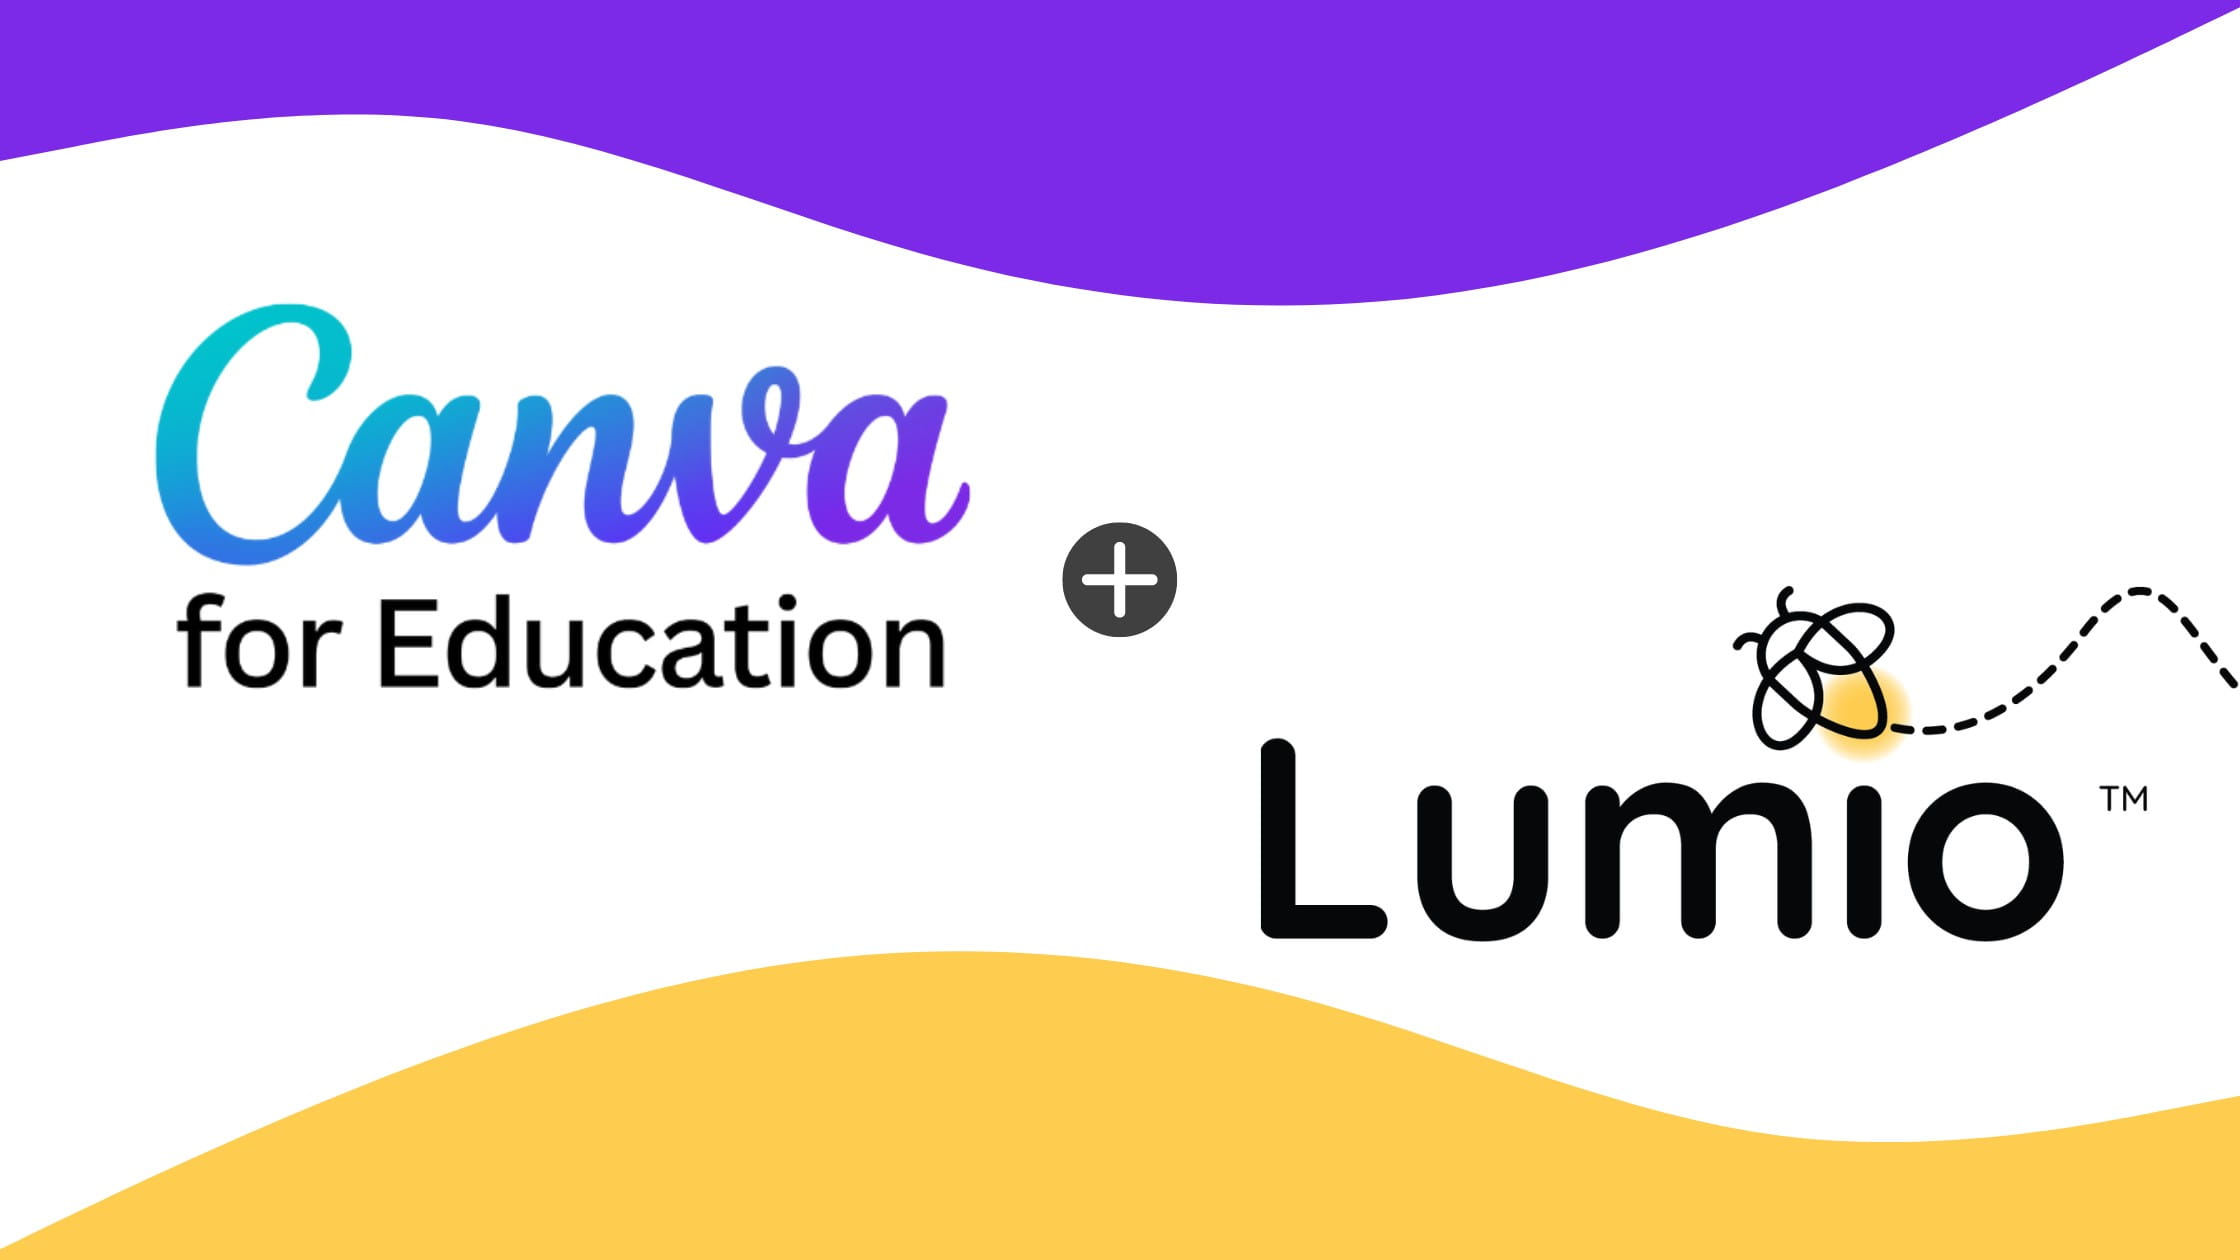 Canva and Lumio logos together showcasing the new integration.